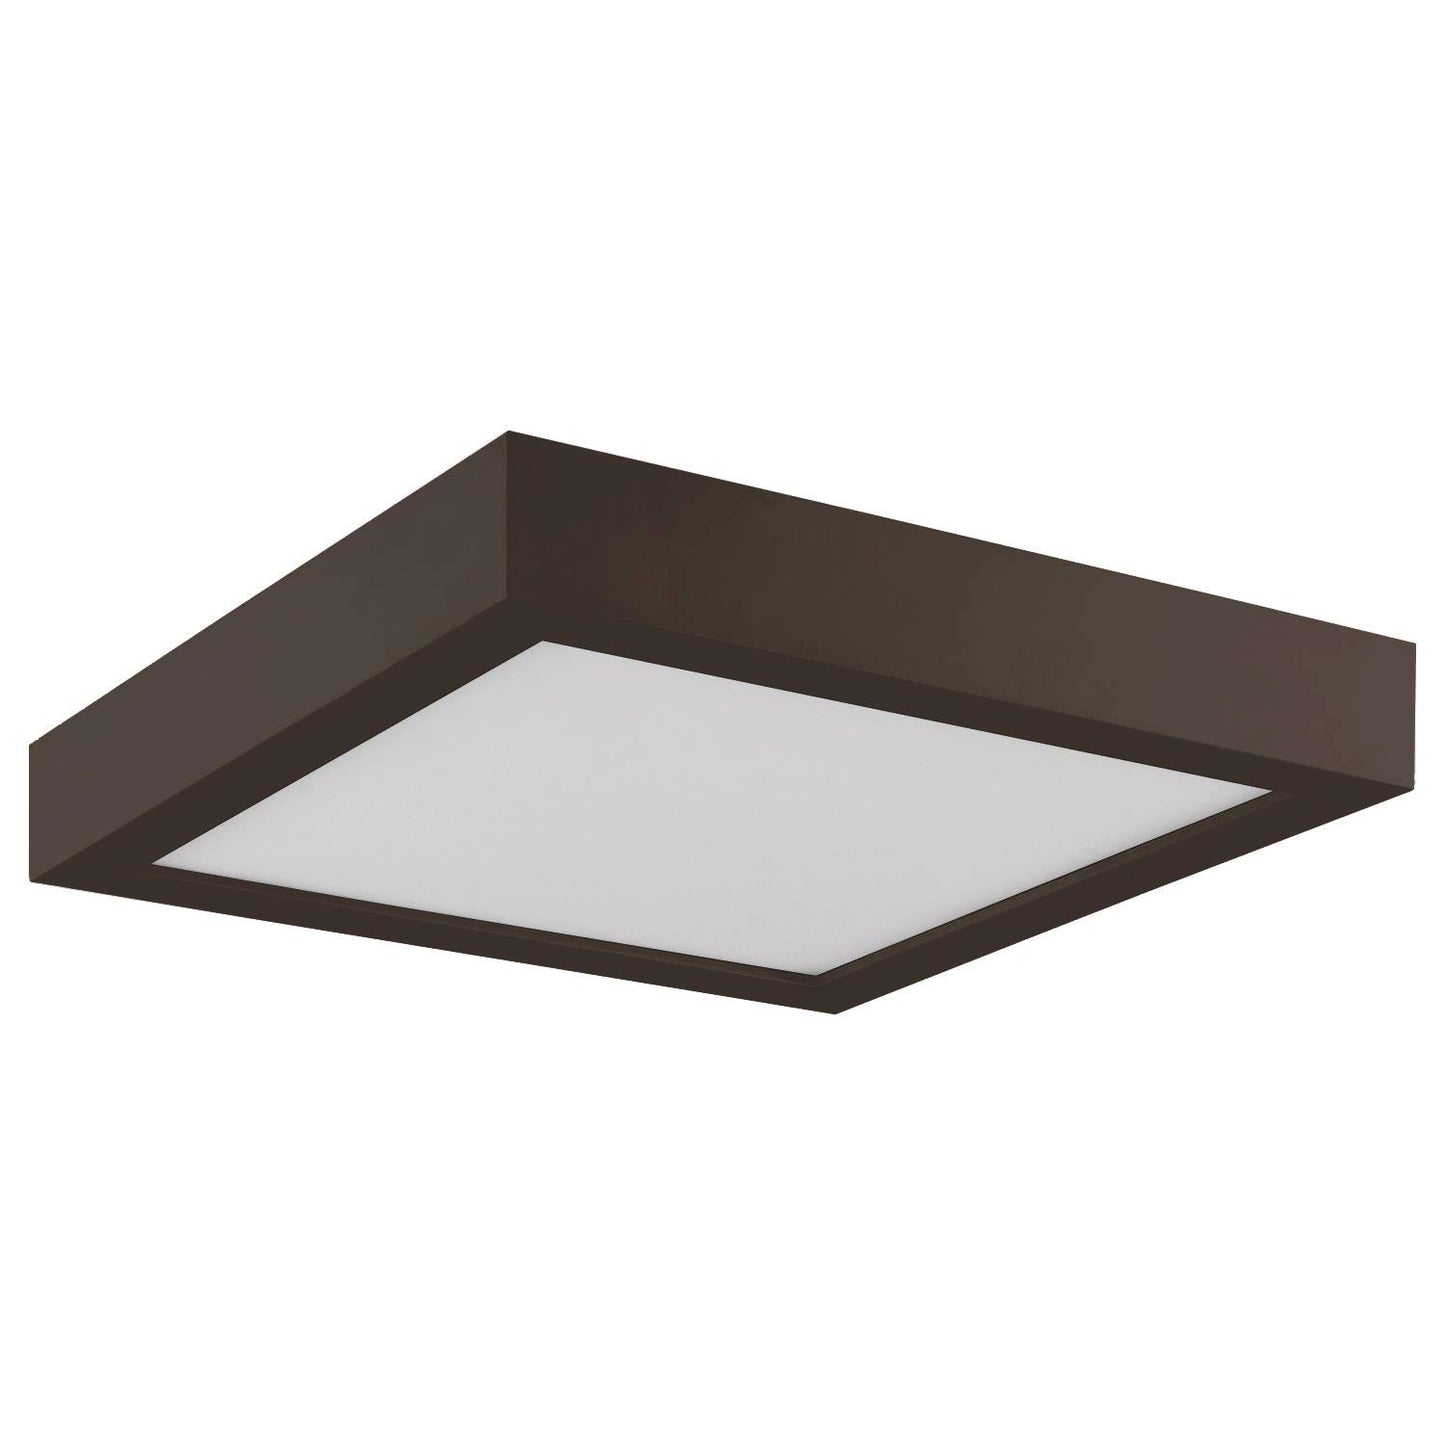 Sunlite LED 7-Inch Square Surface Mount Ceiling Light Fixture, 14 Watts, Dimmable, 3000K Warm White, Energy Star Certified